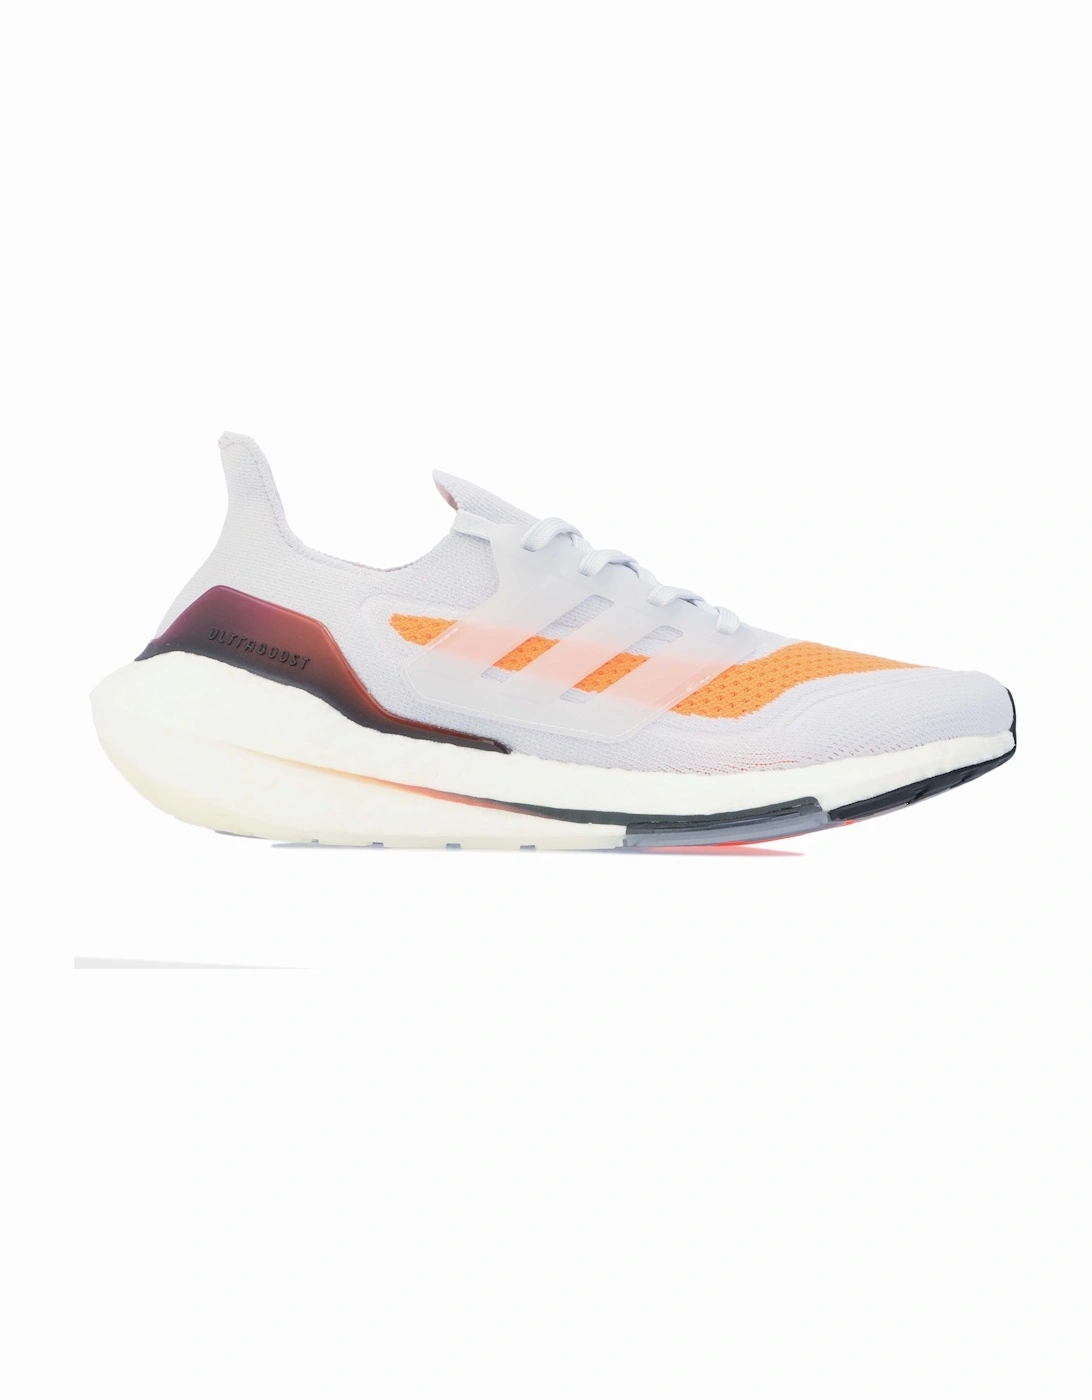 Mens Ultraboost 21 Shoes, 7 of 6